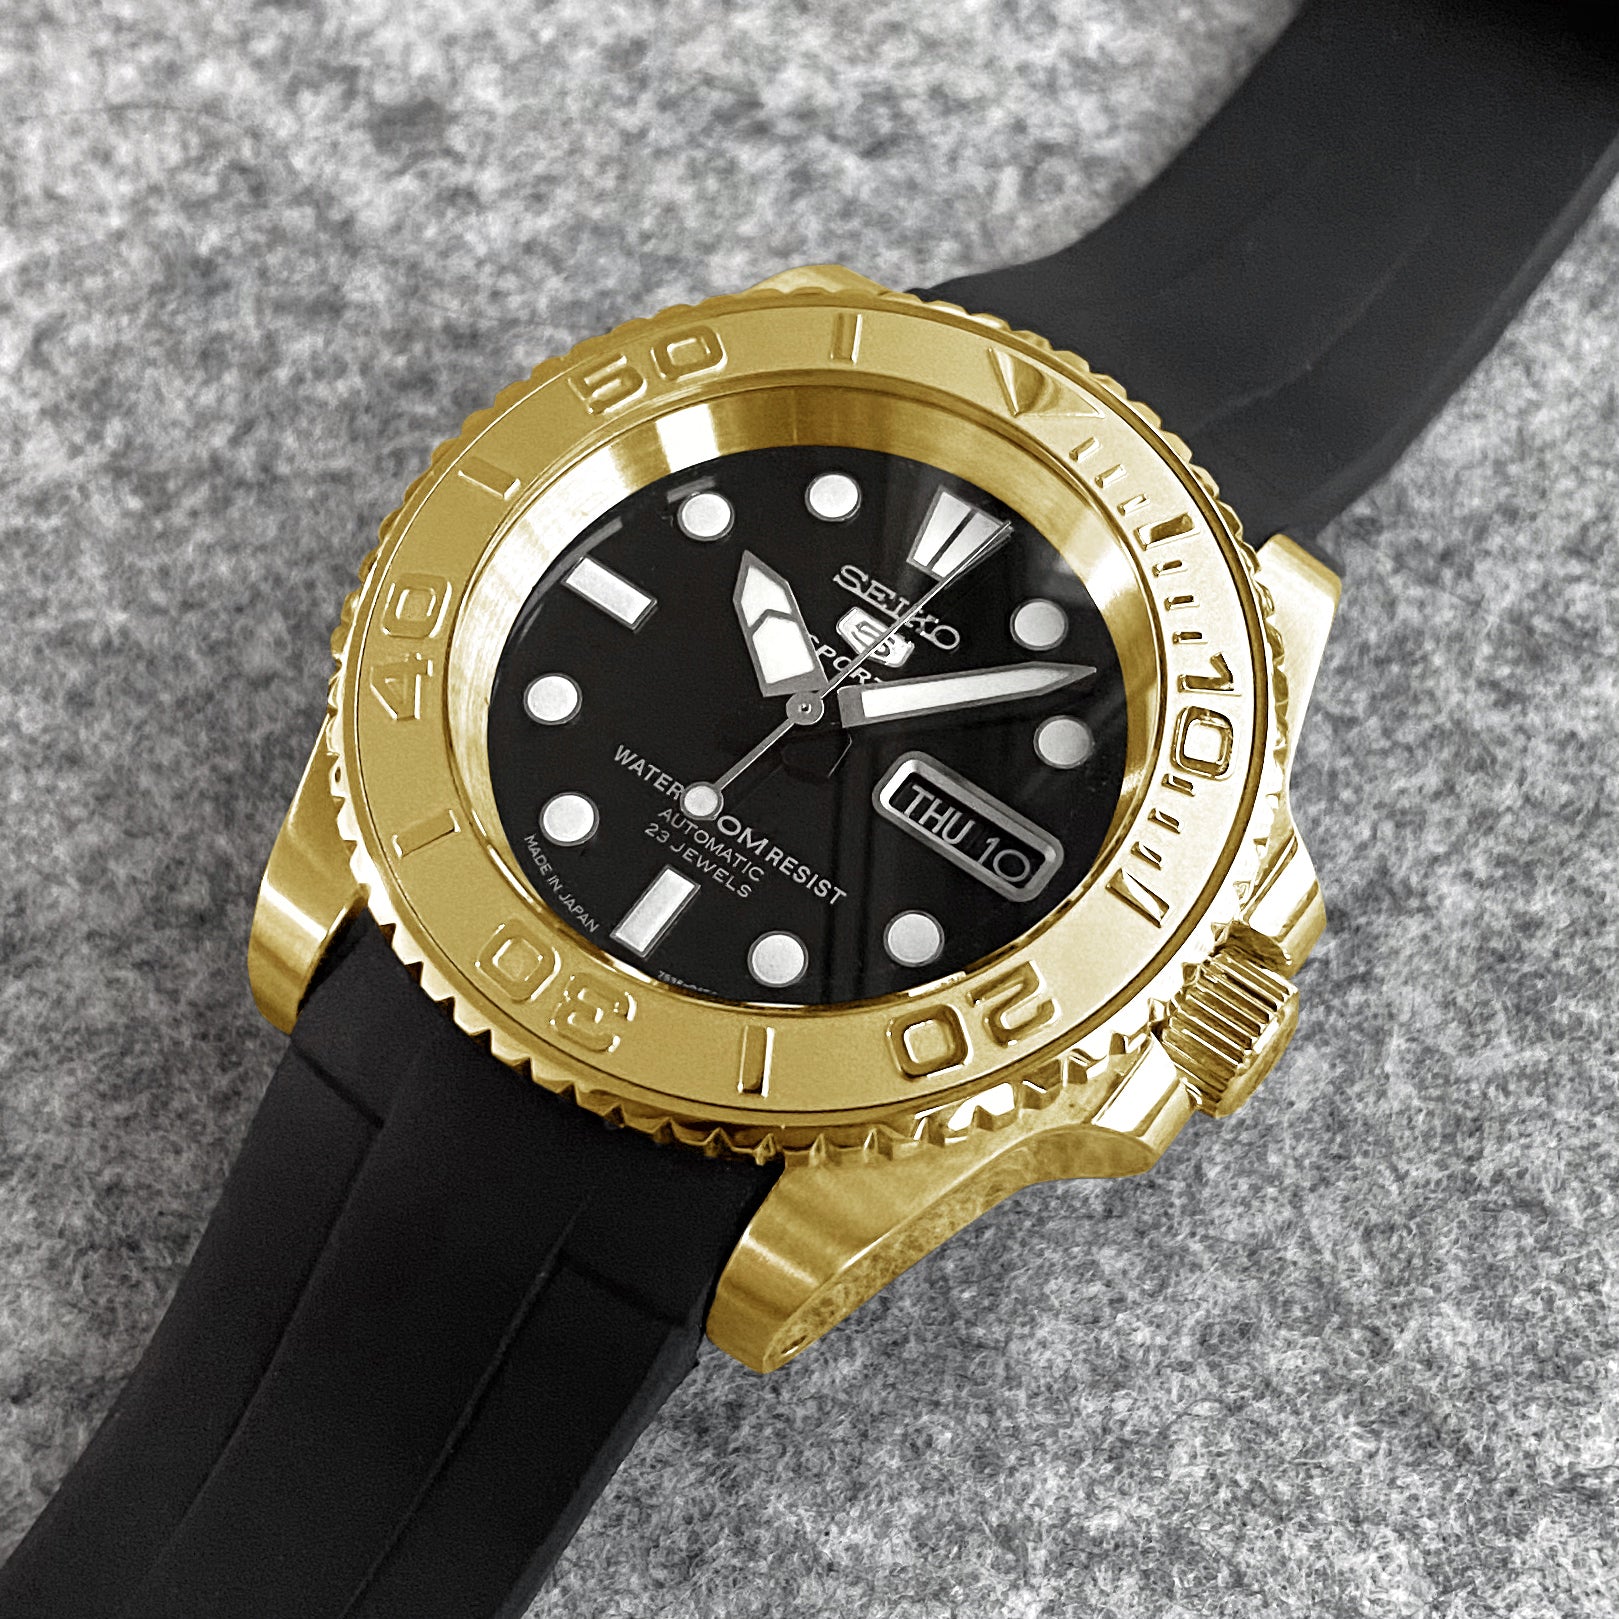 Case - SKX007 Sub - Polished PVD Gold (With Case Back)